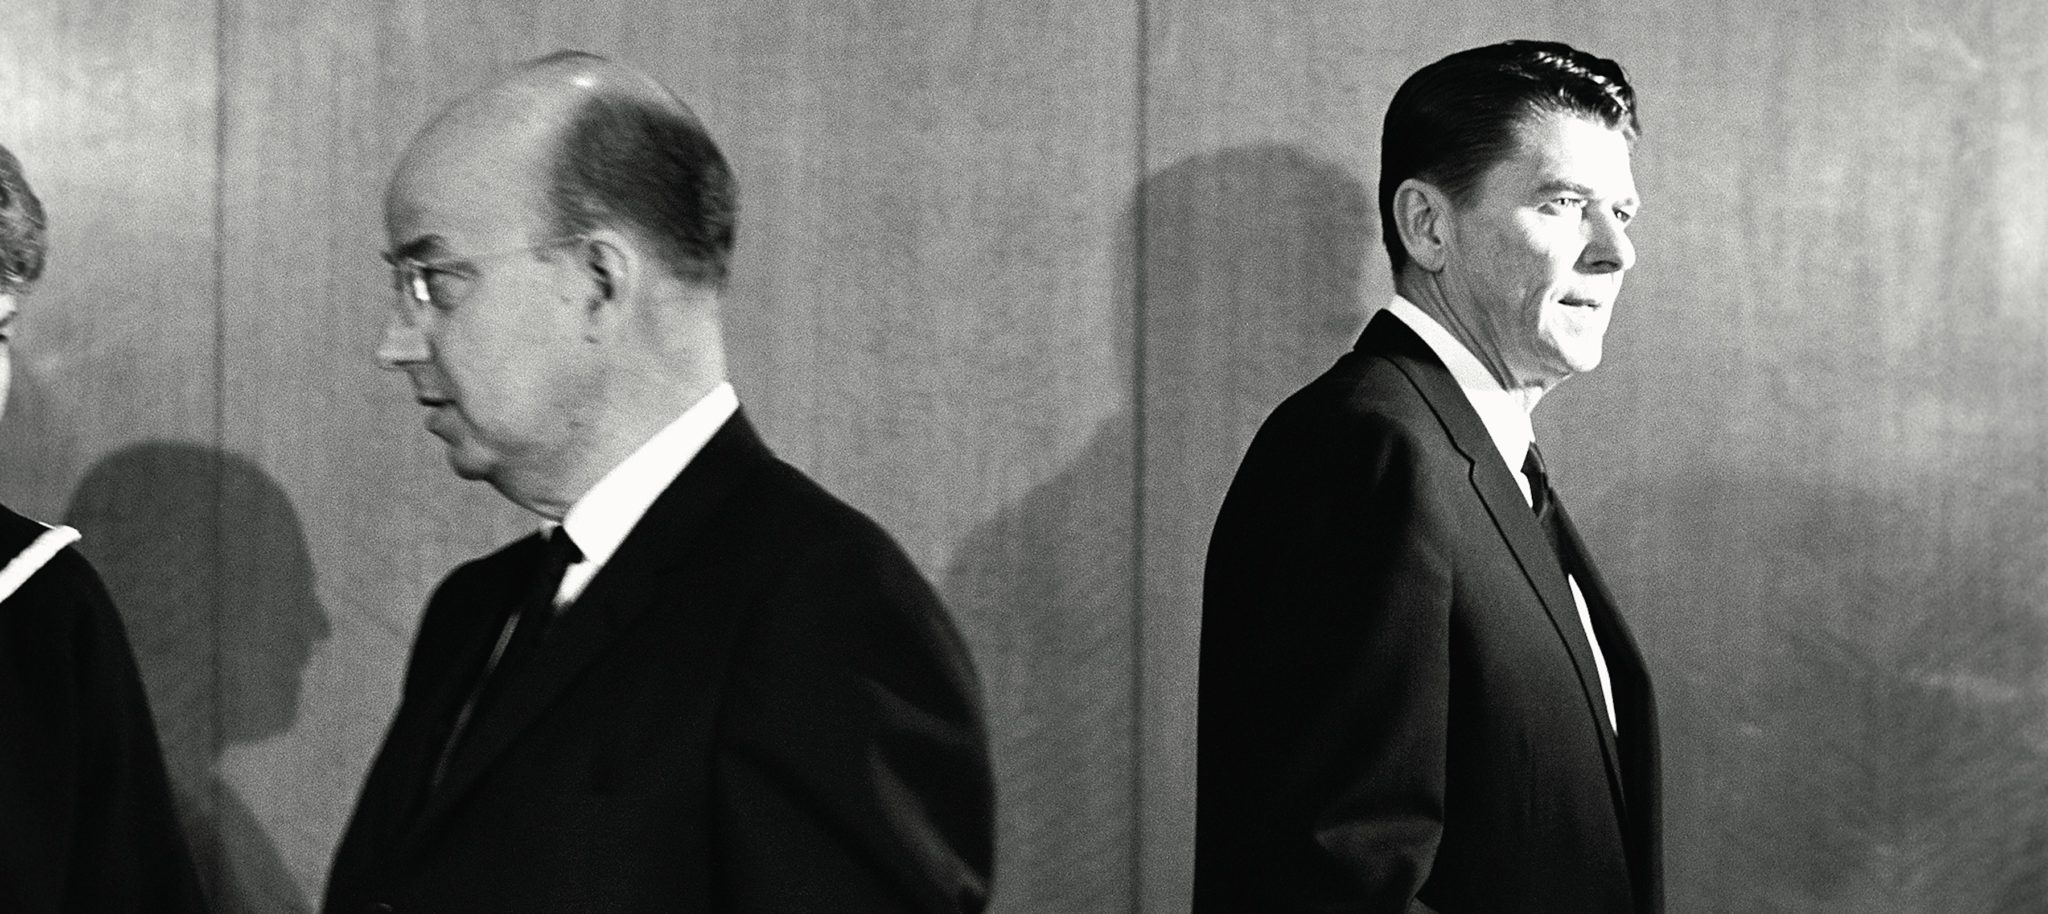 Clark Kerr [l], former President of the University of California, leaves a meeting of the Board of Regents after they fired him at Governor Ronald Reagan's insistence.